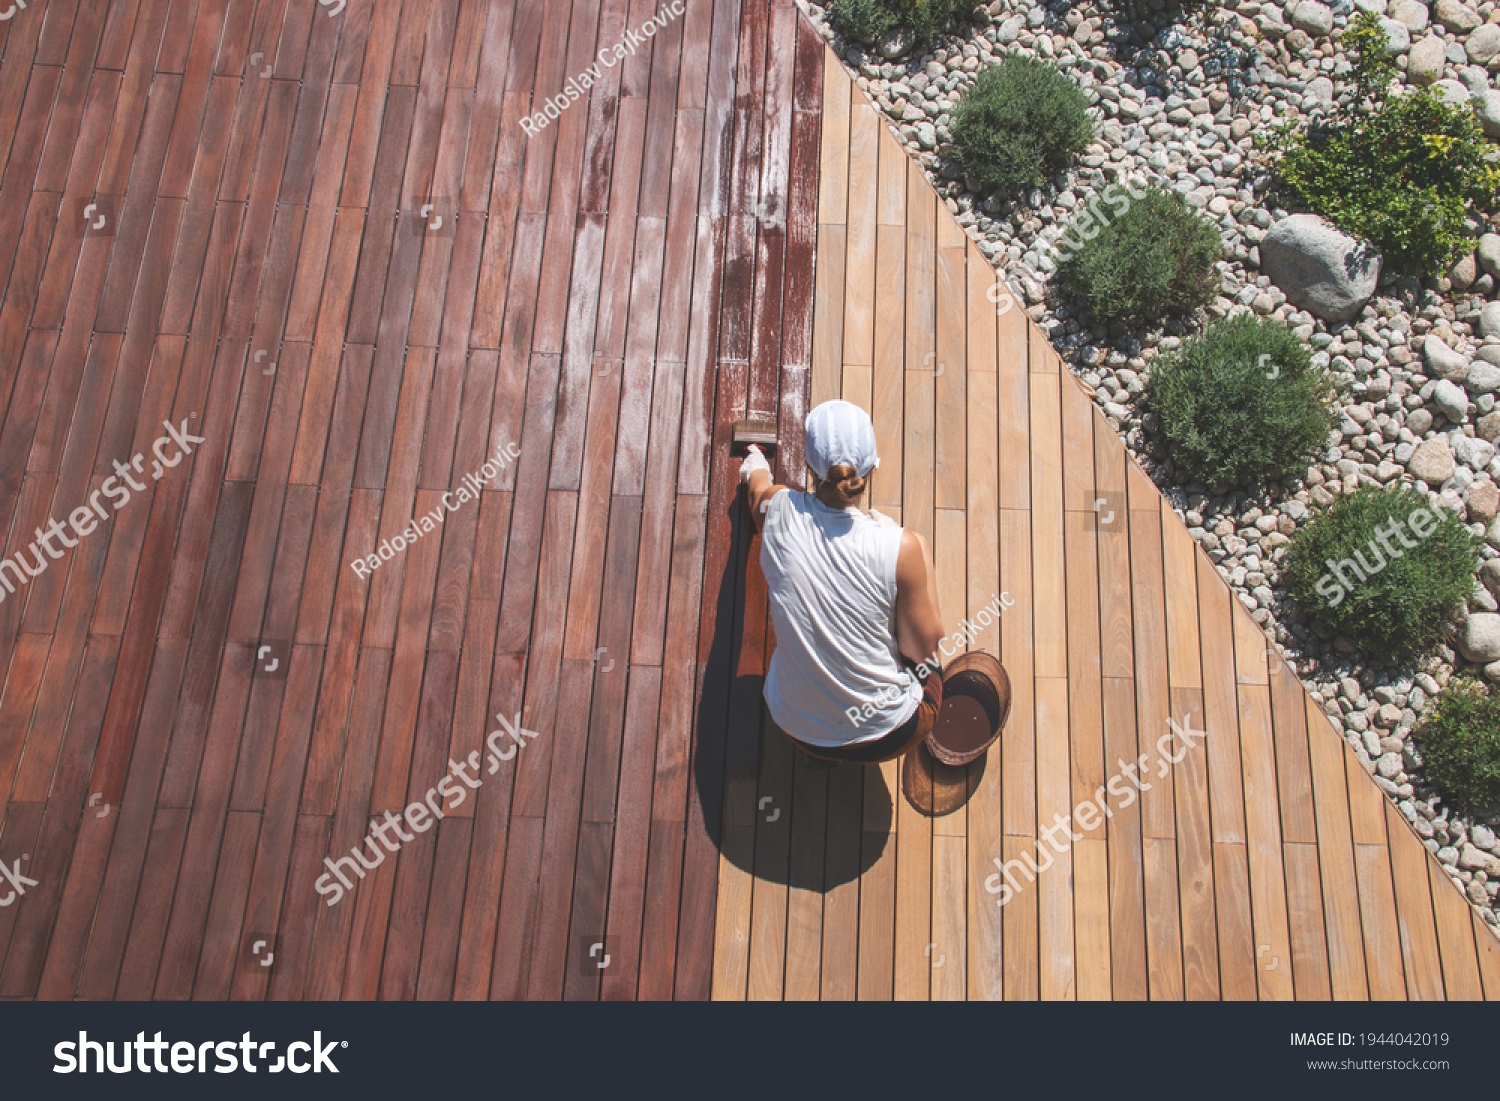 Wood deck renovation treatment, the person applying protective wood stain with a brush, overhead view of ipe hardwood decking restoration process #1944042019